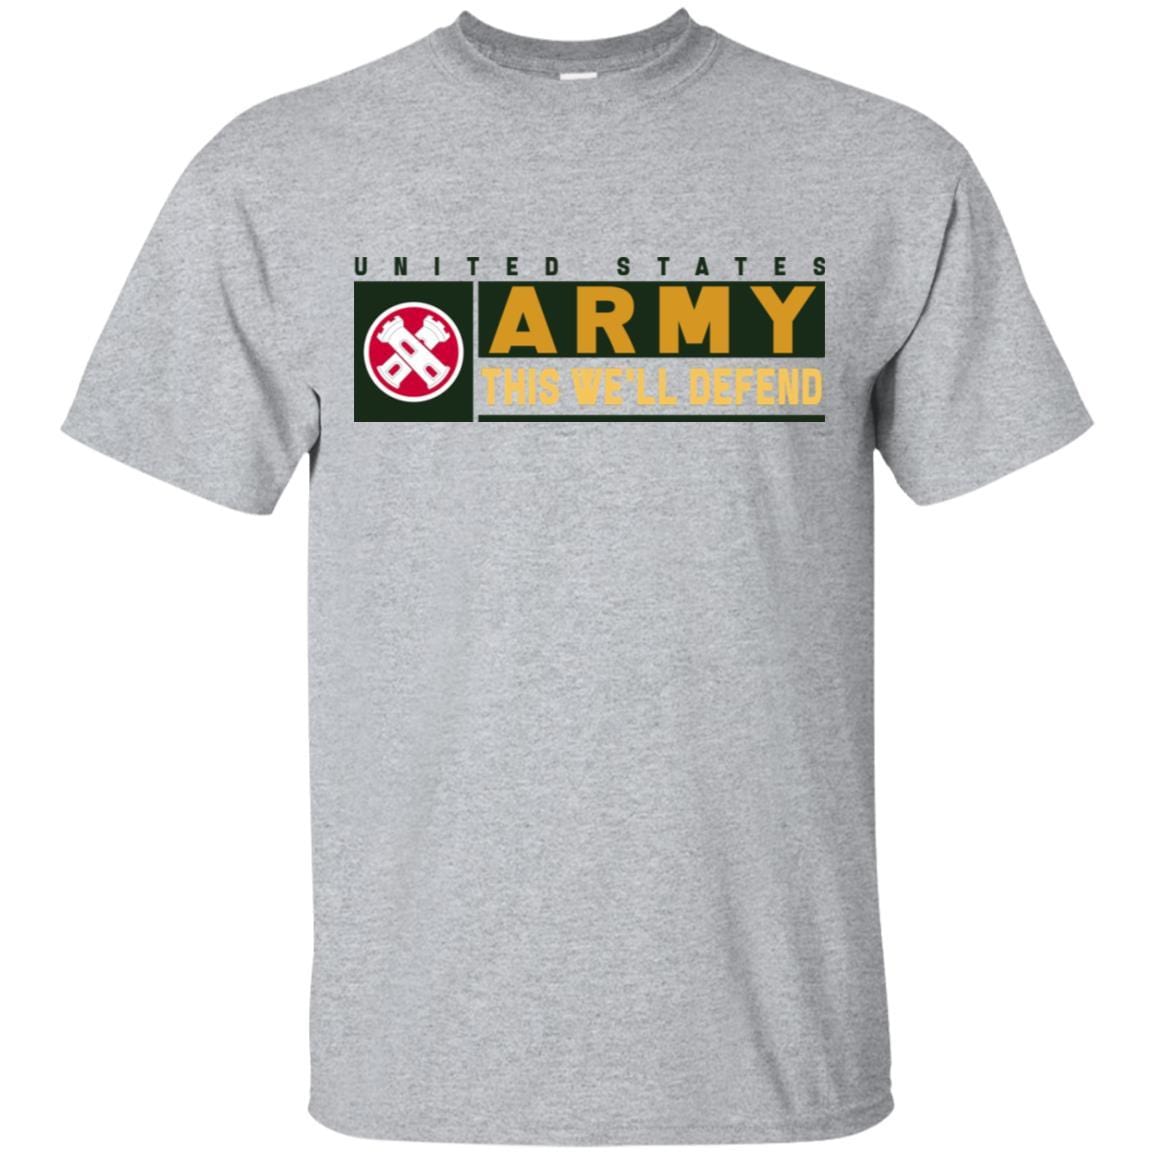 US Army 16TH ENGINEER BRIGADE- This We'll Defend T-Shirt On Front For Men-TShirt-Army-Veterans Nation